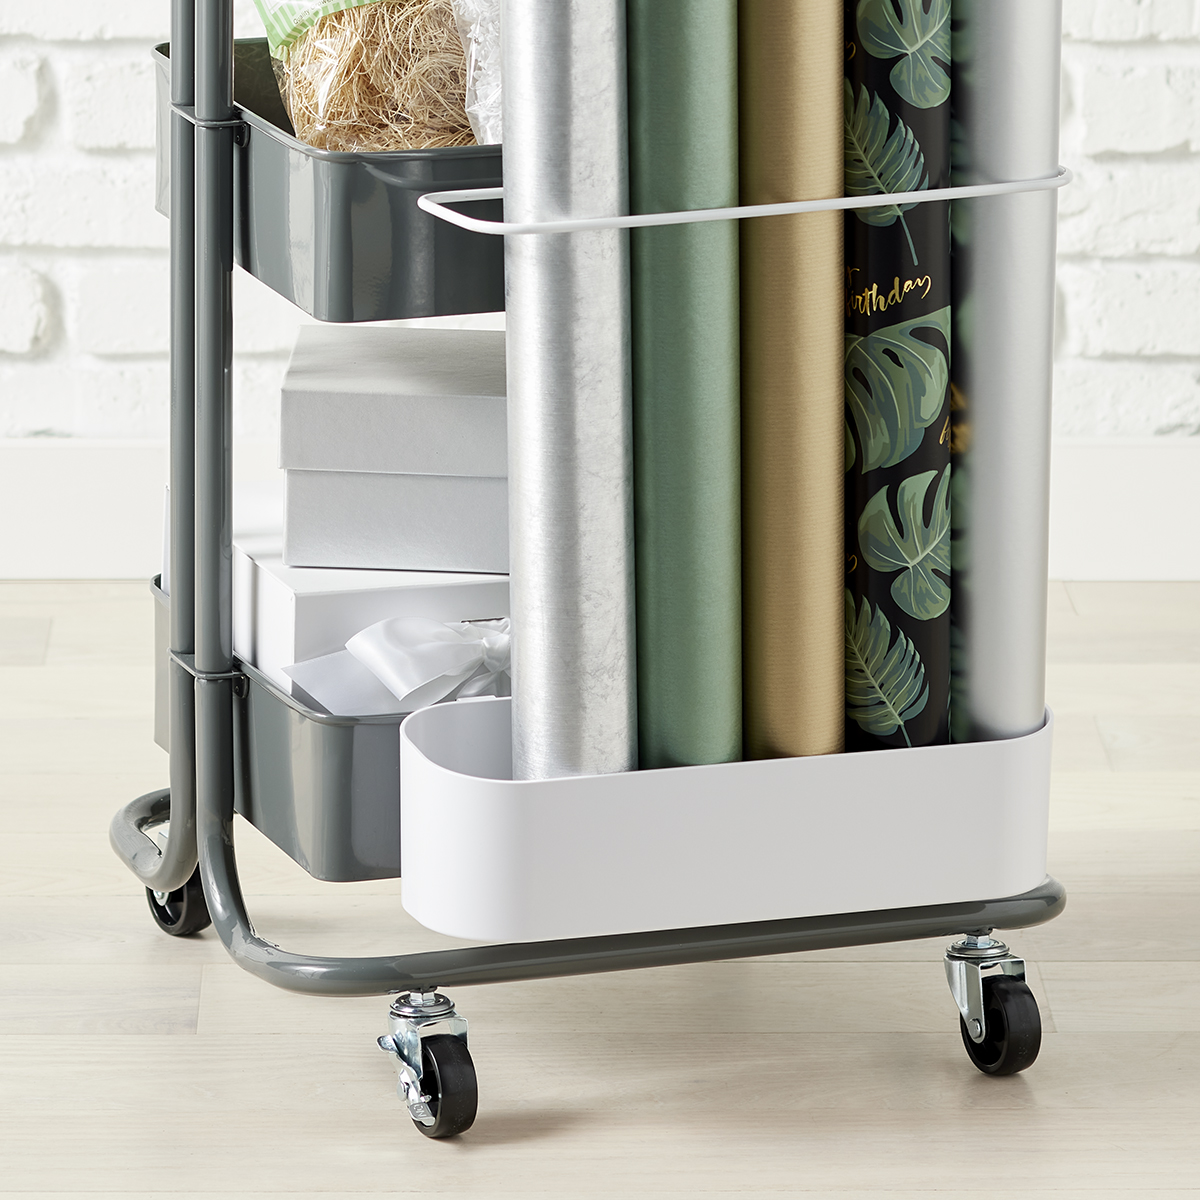 https://www.containerstore.com/catalogimages/479318/10092279-3-tier-cart-gift-wrap-organ.jpg